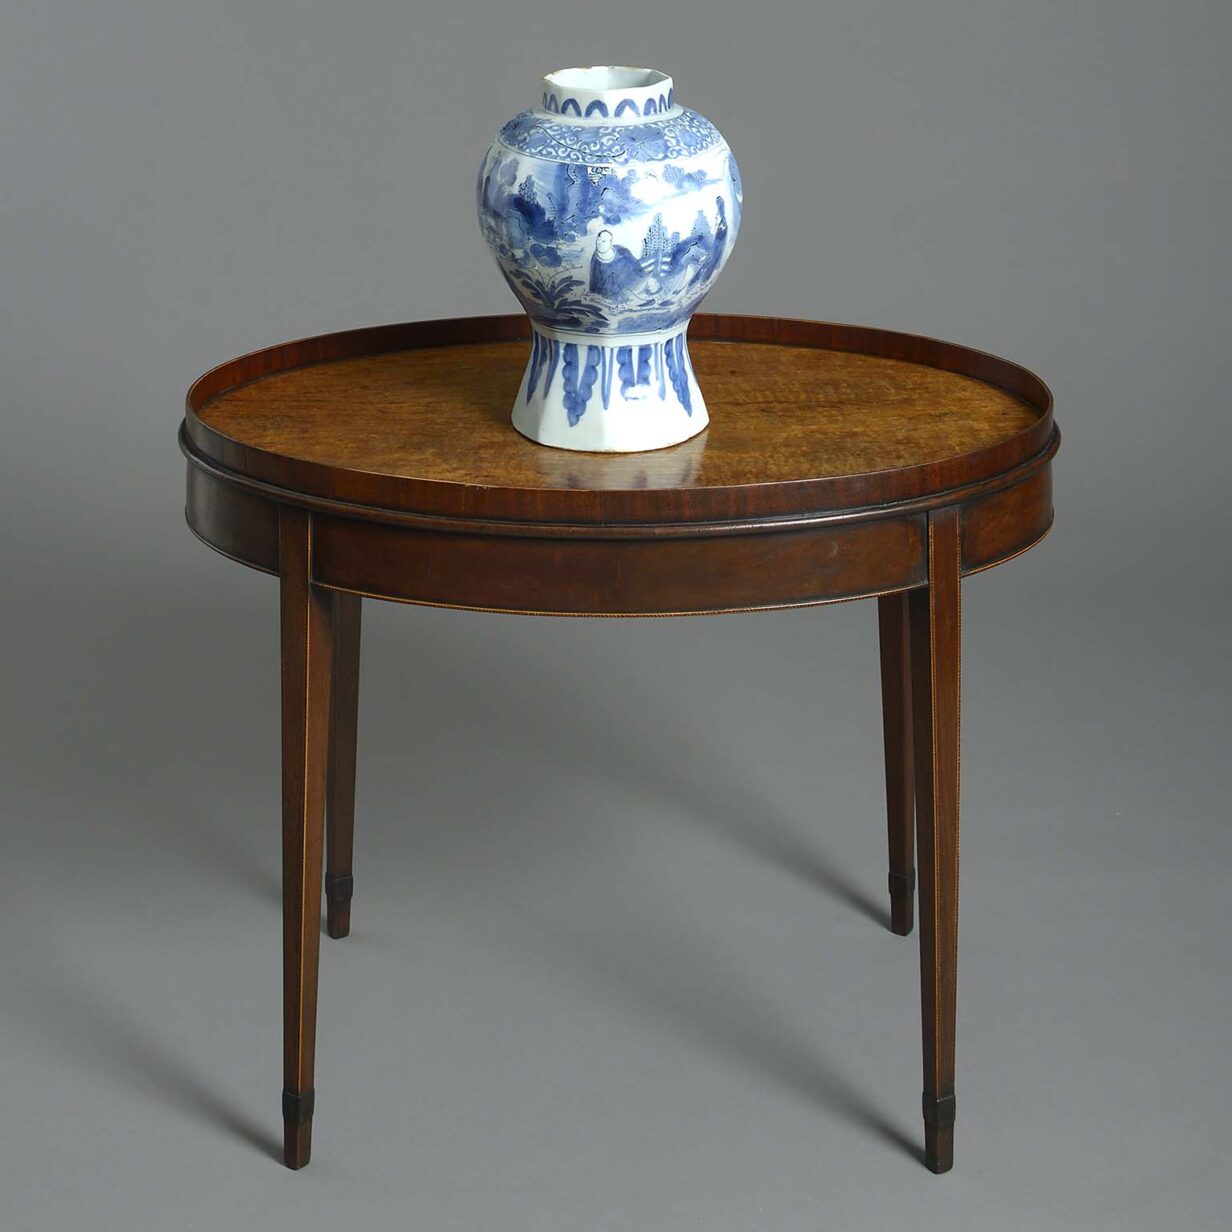 Late 18th century george iii period oval tray on stand